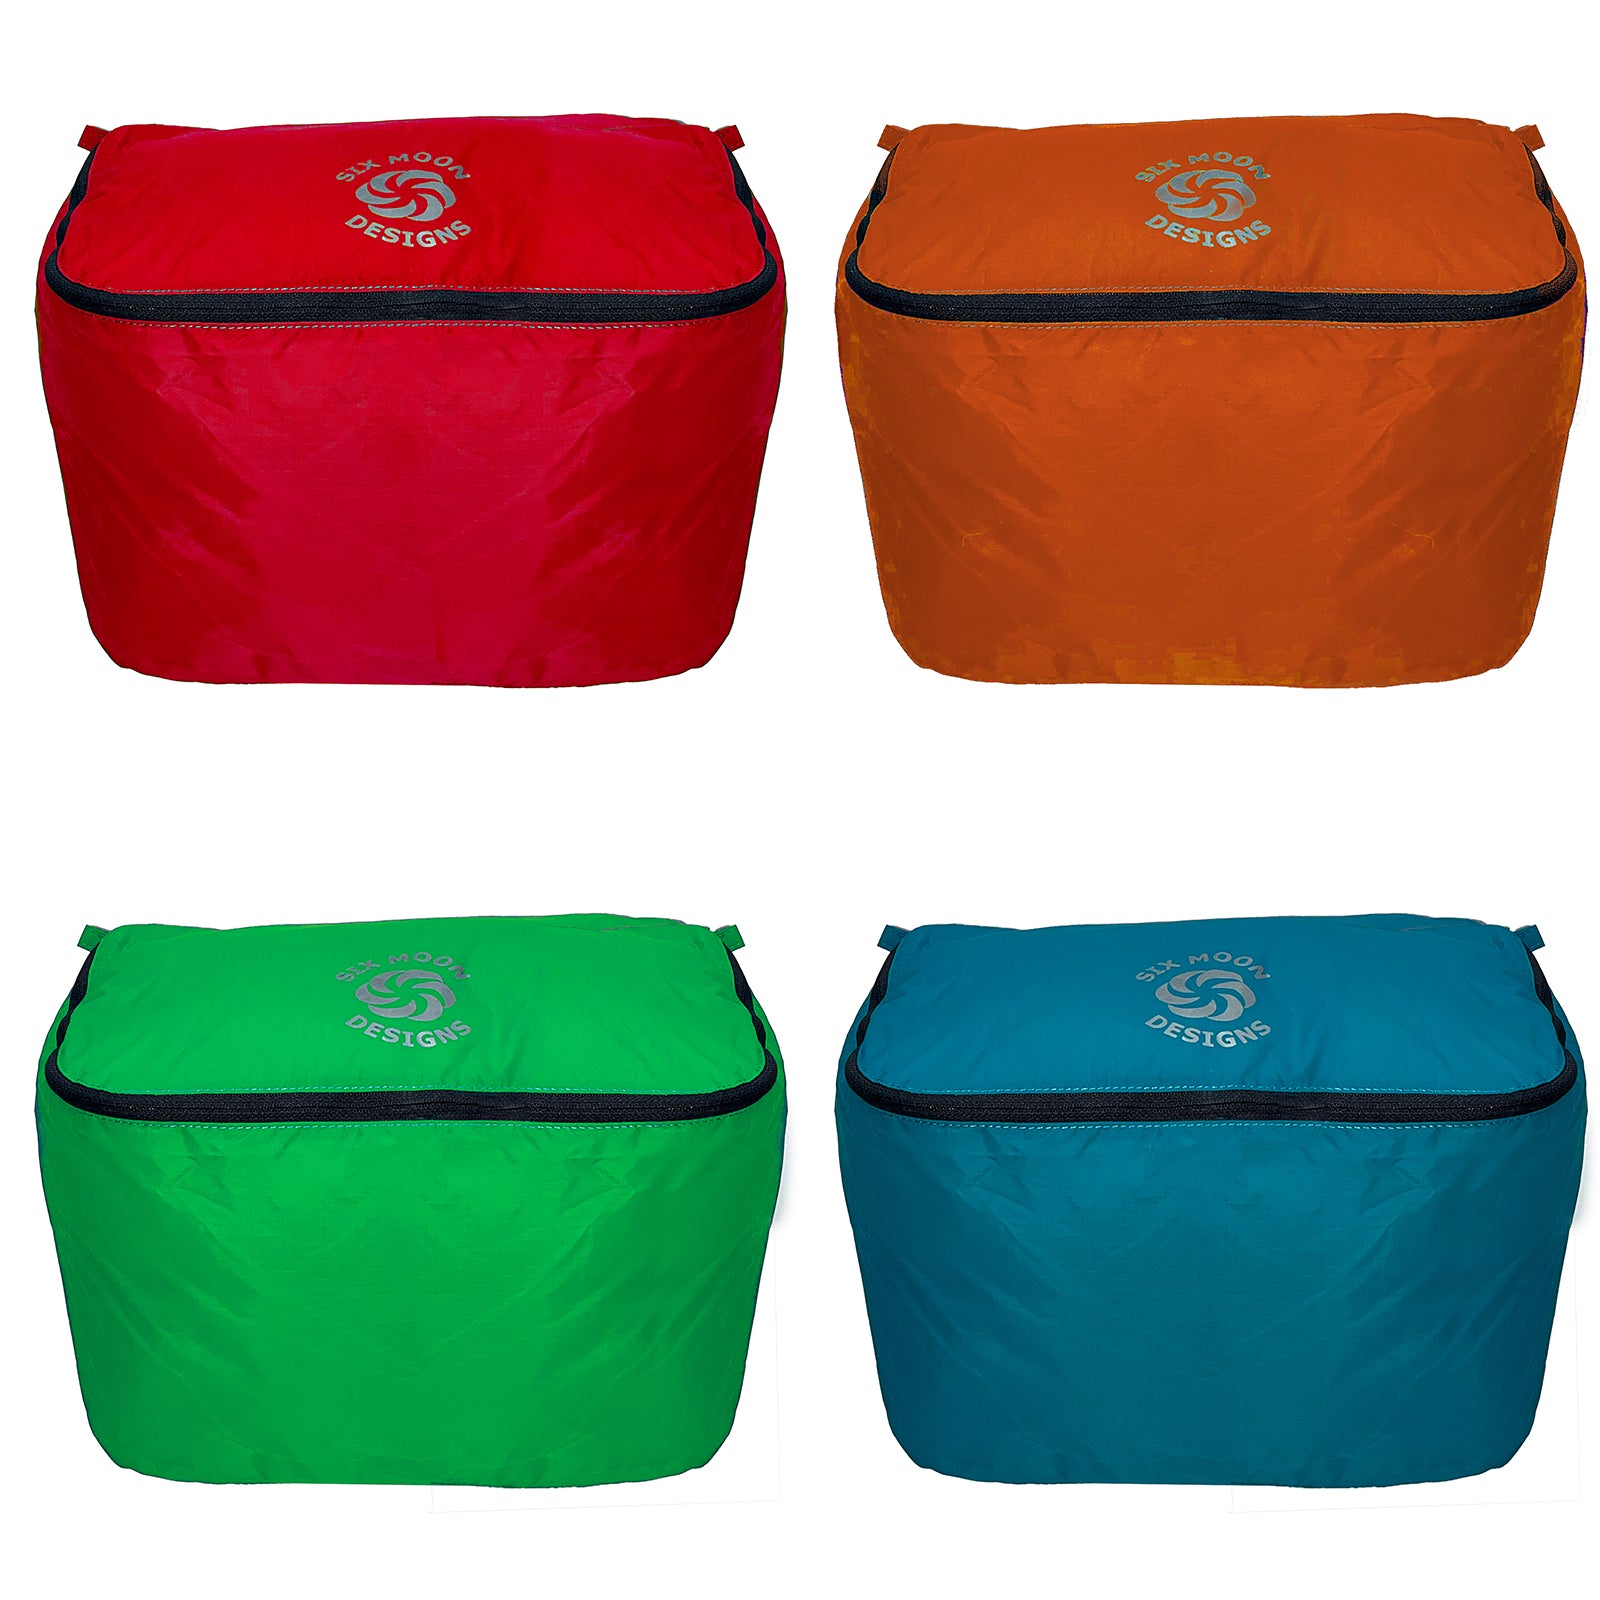 All 4 colors of packing pod XL.  Red, Orange, Green, Blue